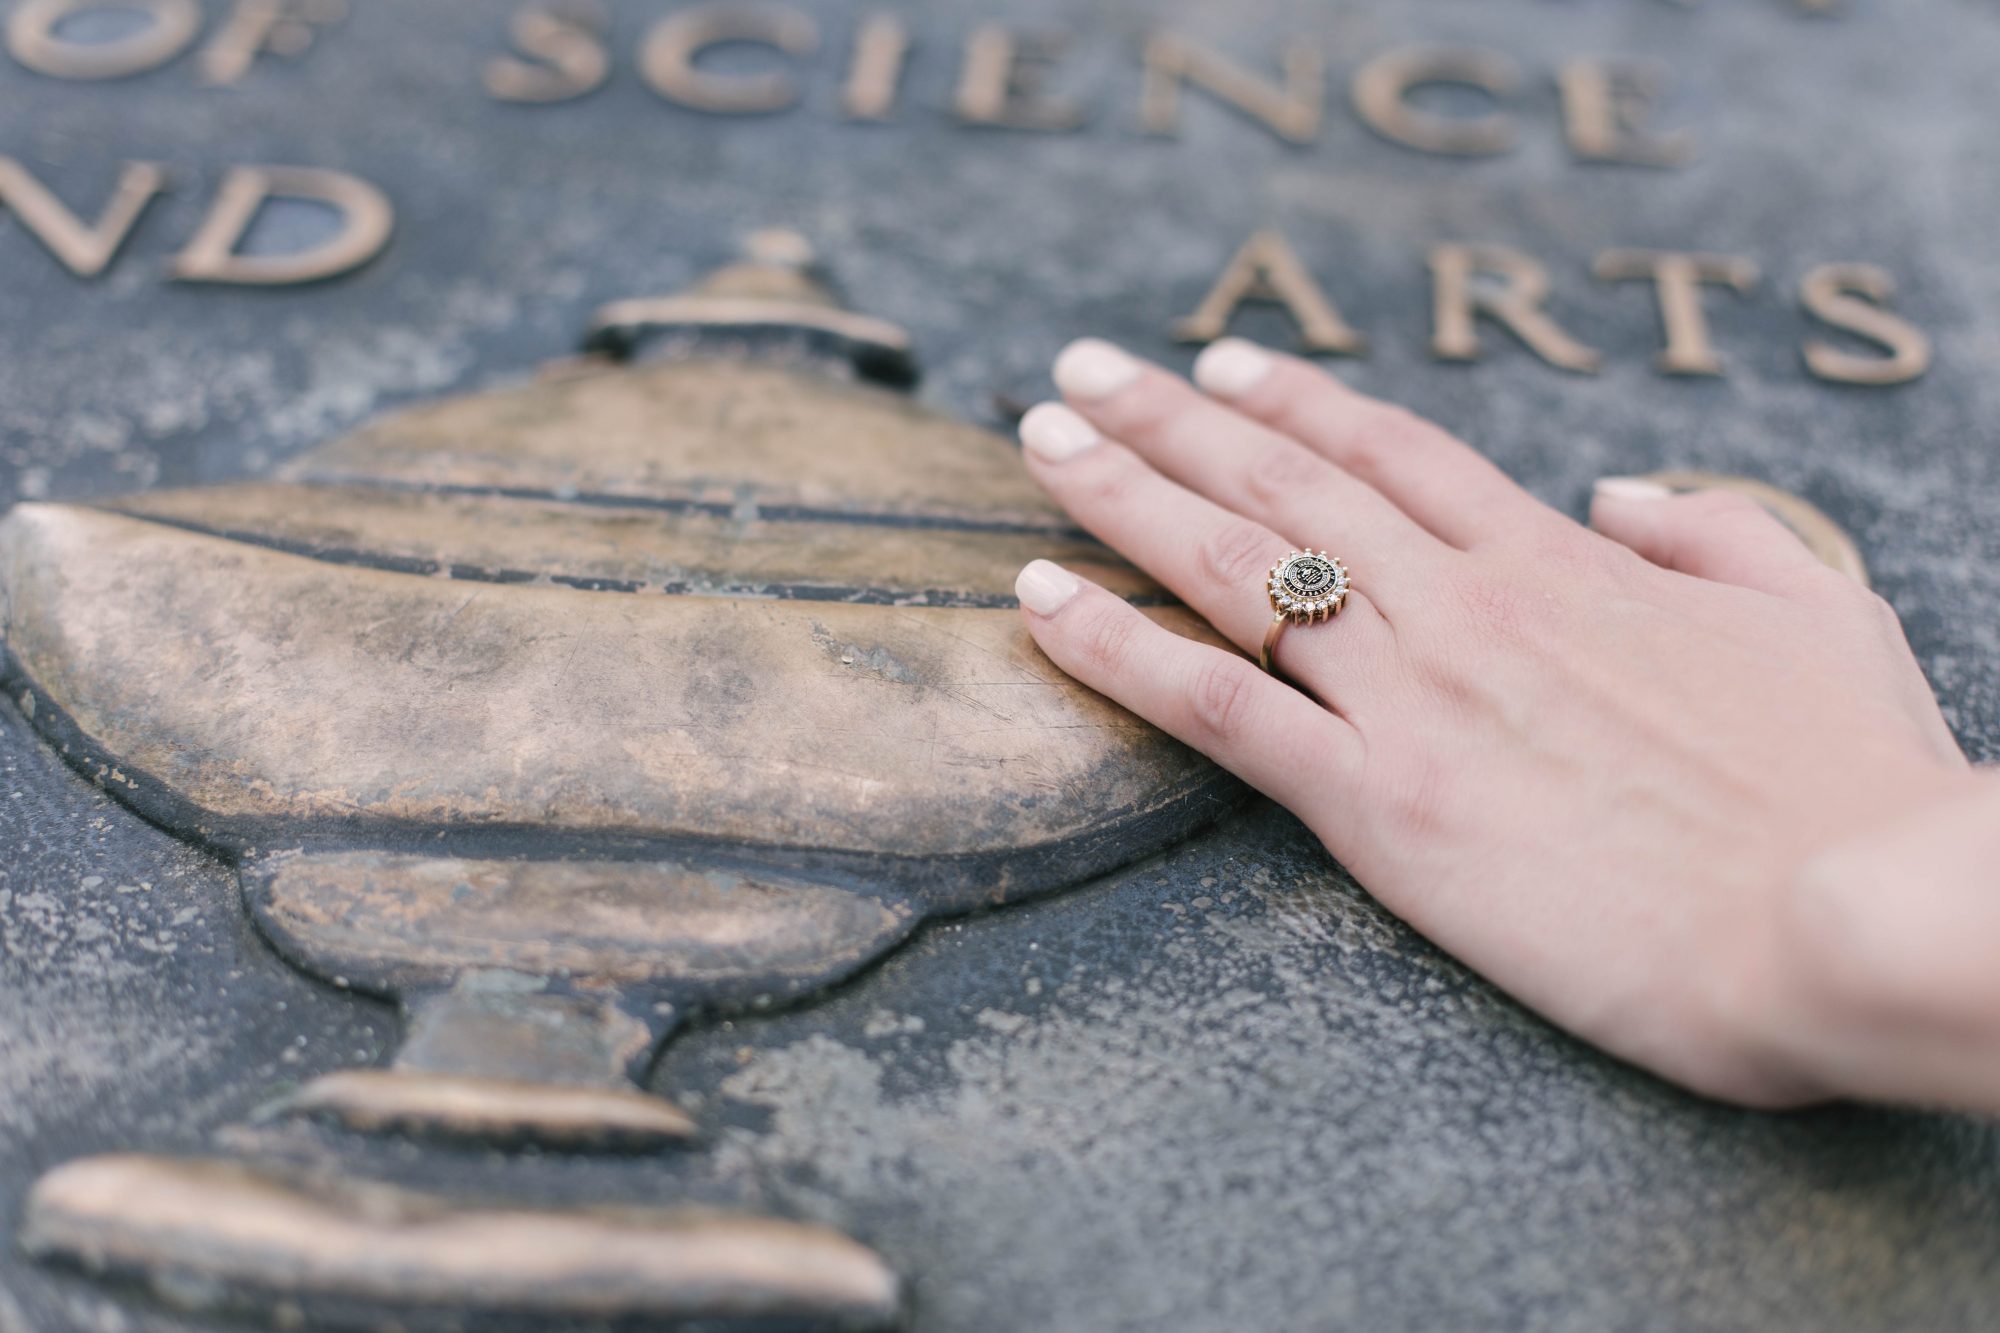 A hand wearing the Women's Dinner Ring places its hand over the Auburn Seal.